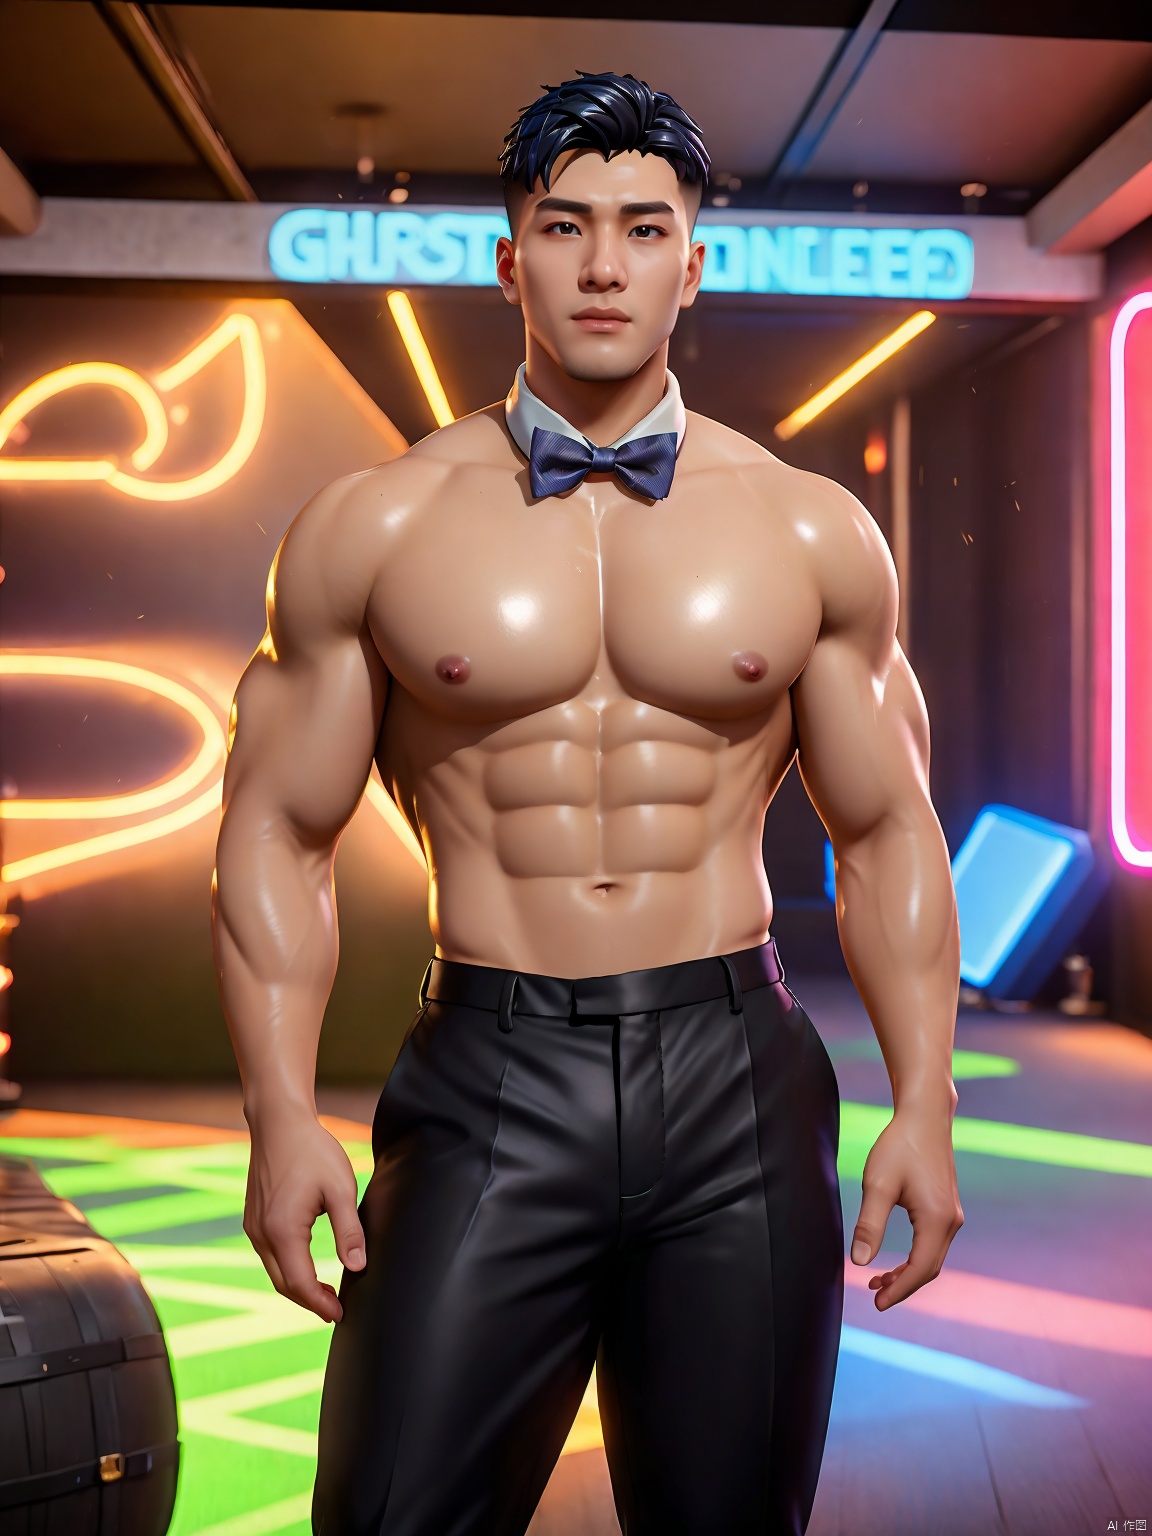  masterpiece, 1 Man, Look at me, Handsome, Indoor, Nightclub, Neon light, Light and shadow, Greasy and shiny skin, Black trousers, Bow tie, Muscle, Topless, Fortnite, textured skin, super detail, best quality